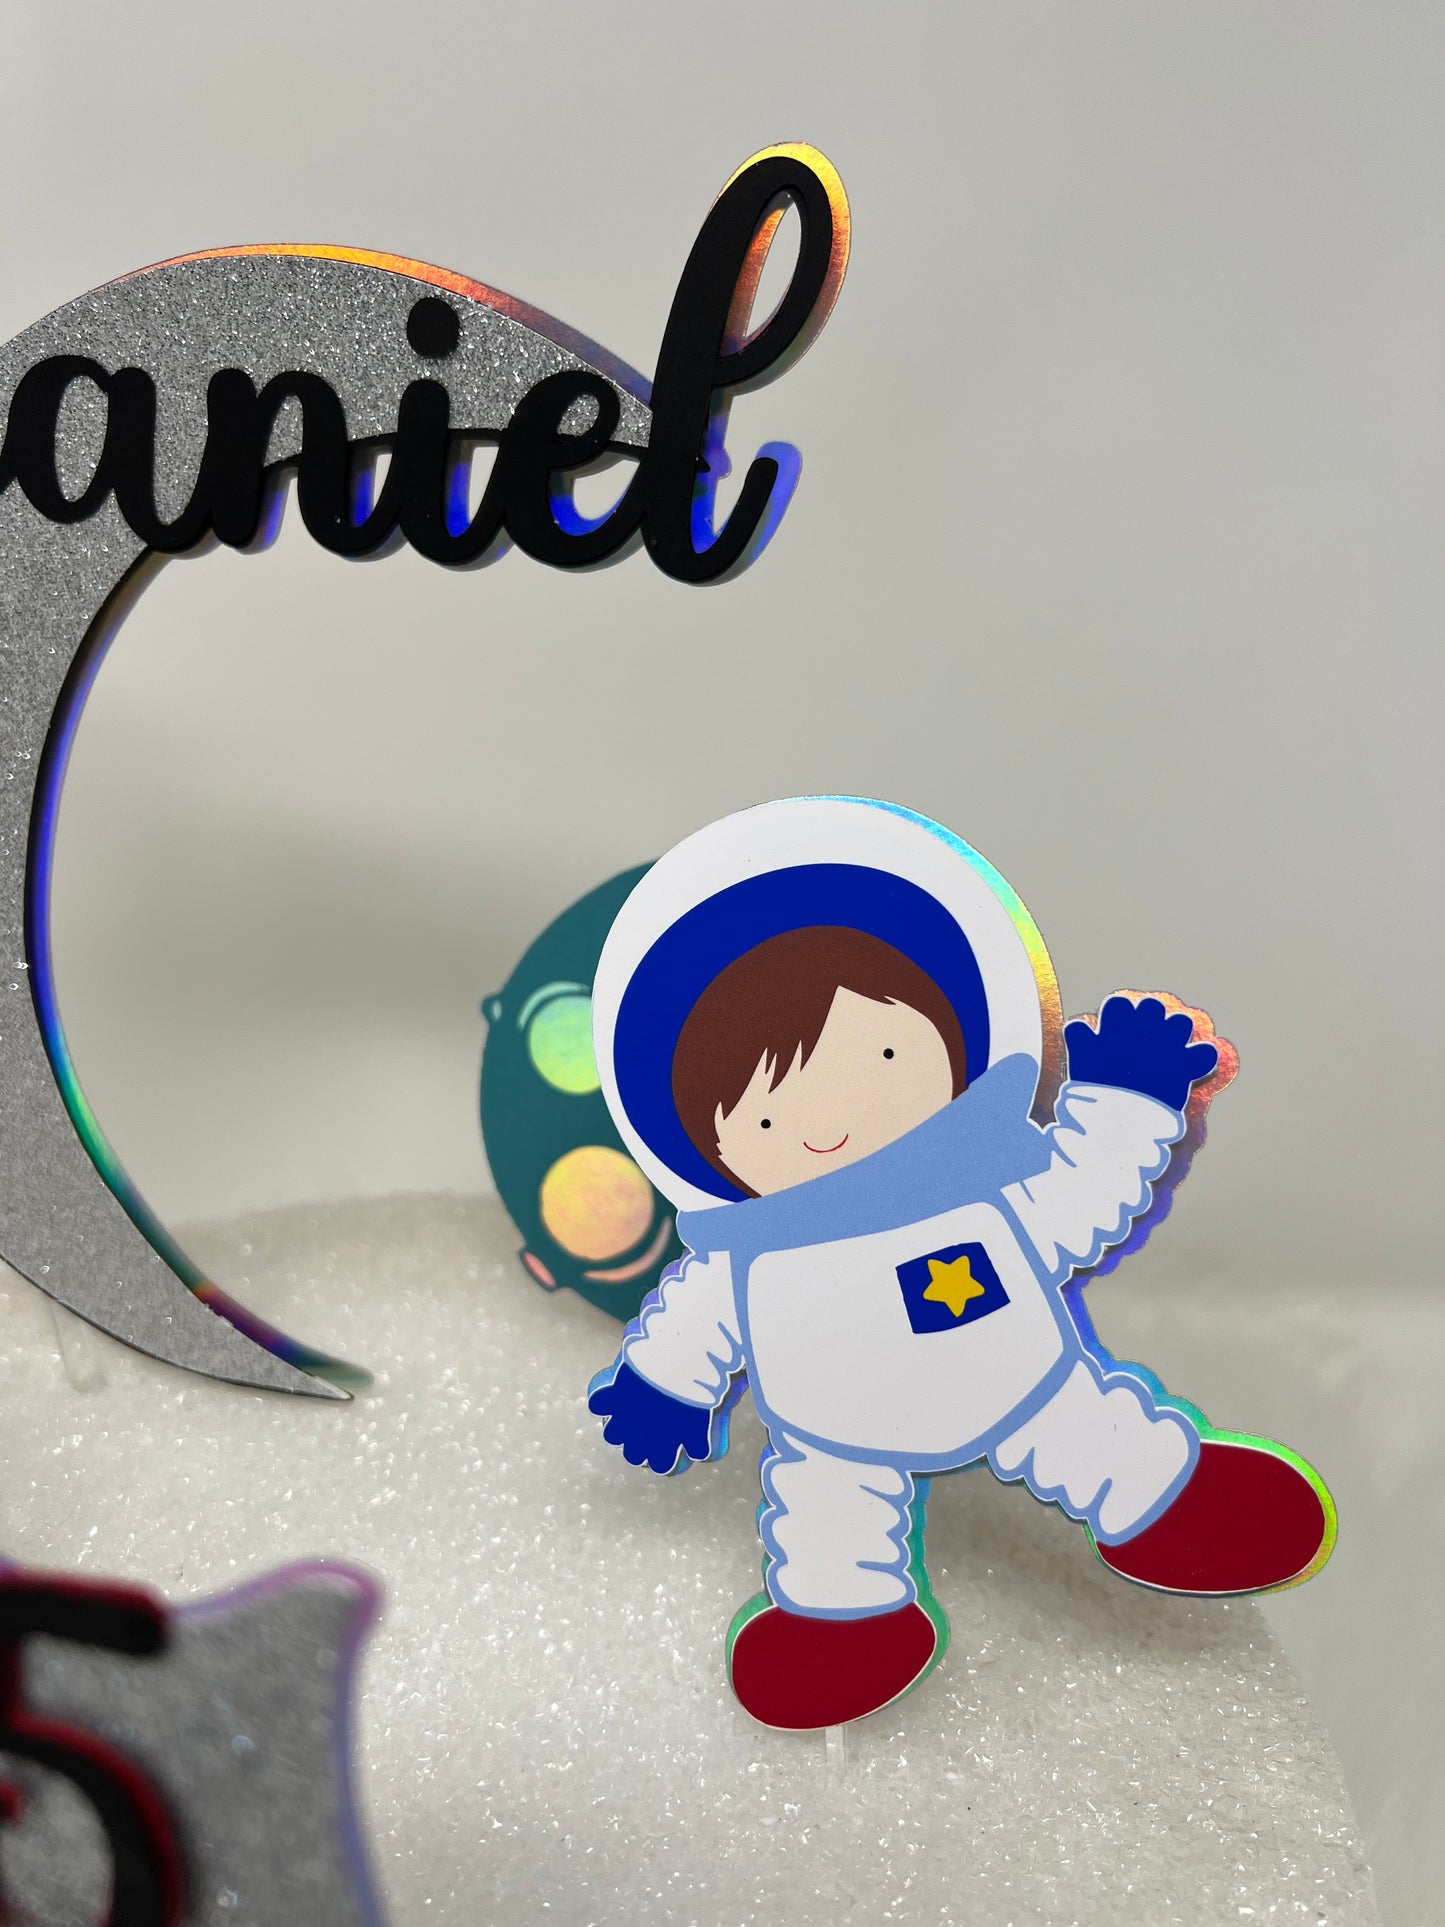 Space Cake Topper, Space Birthday Party, Outer Space Birthday, Astronaut Party Decor, Astronaut Cake Topper, Outer Space Cake Topper